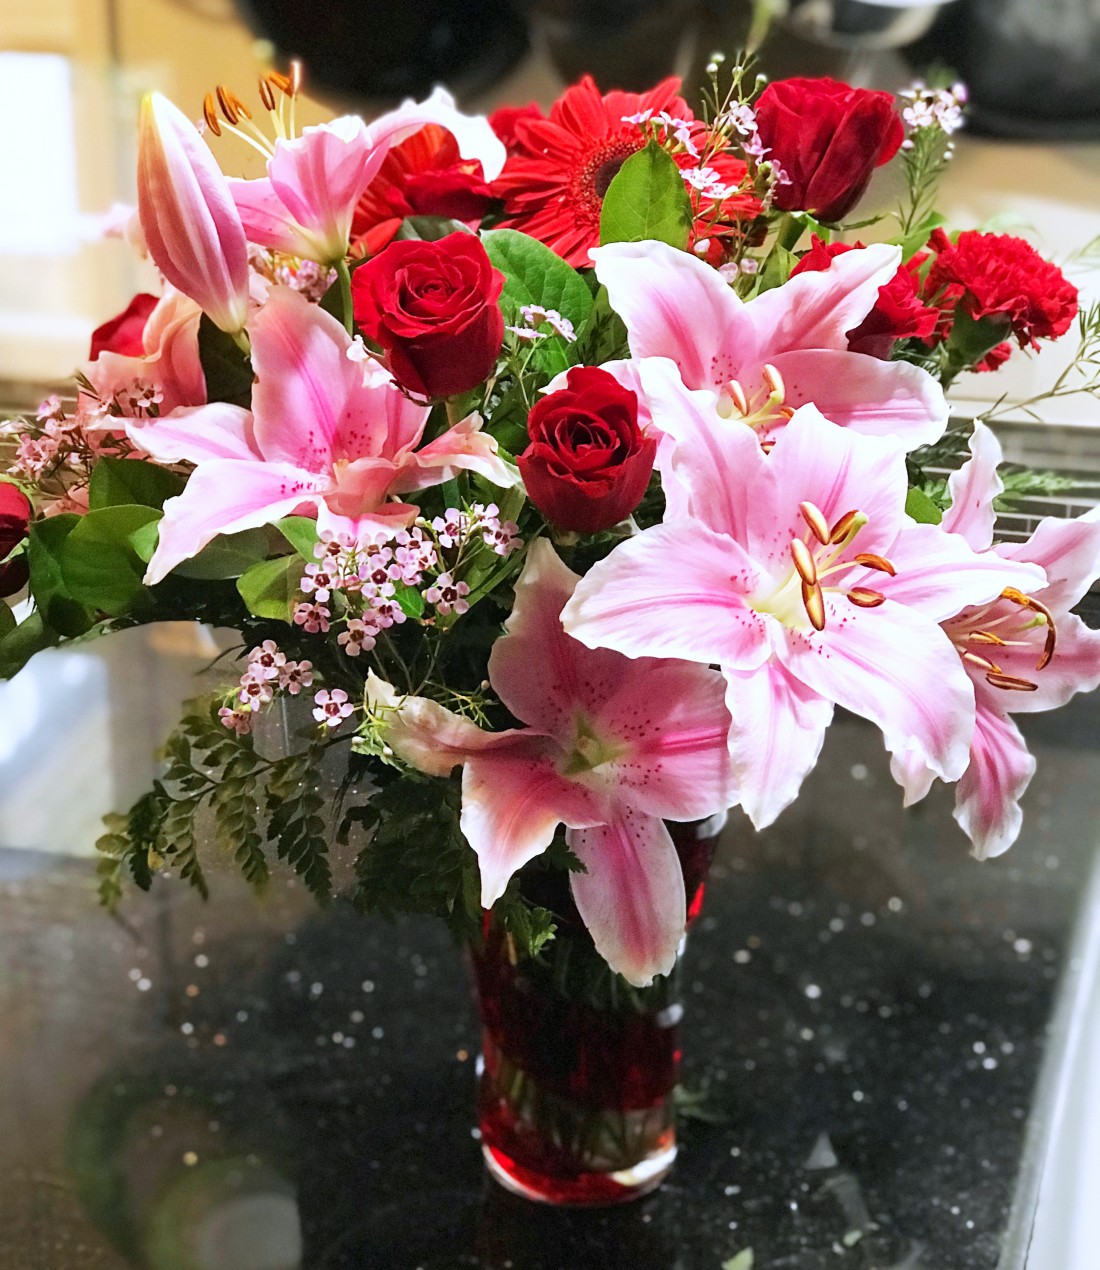 Say It With Flowers: Teleflora Has 4 New Flower Arrangements For Valentine’s Day